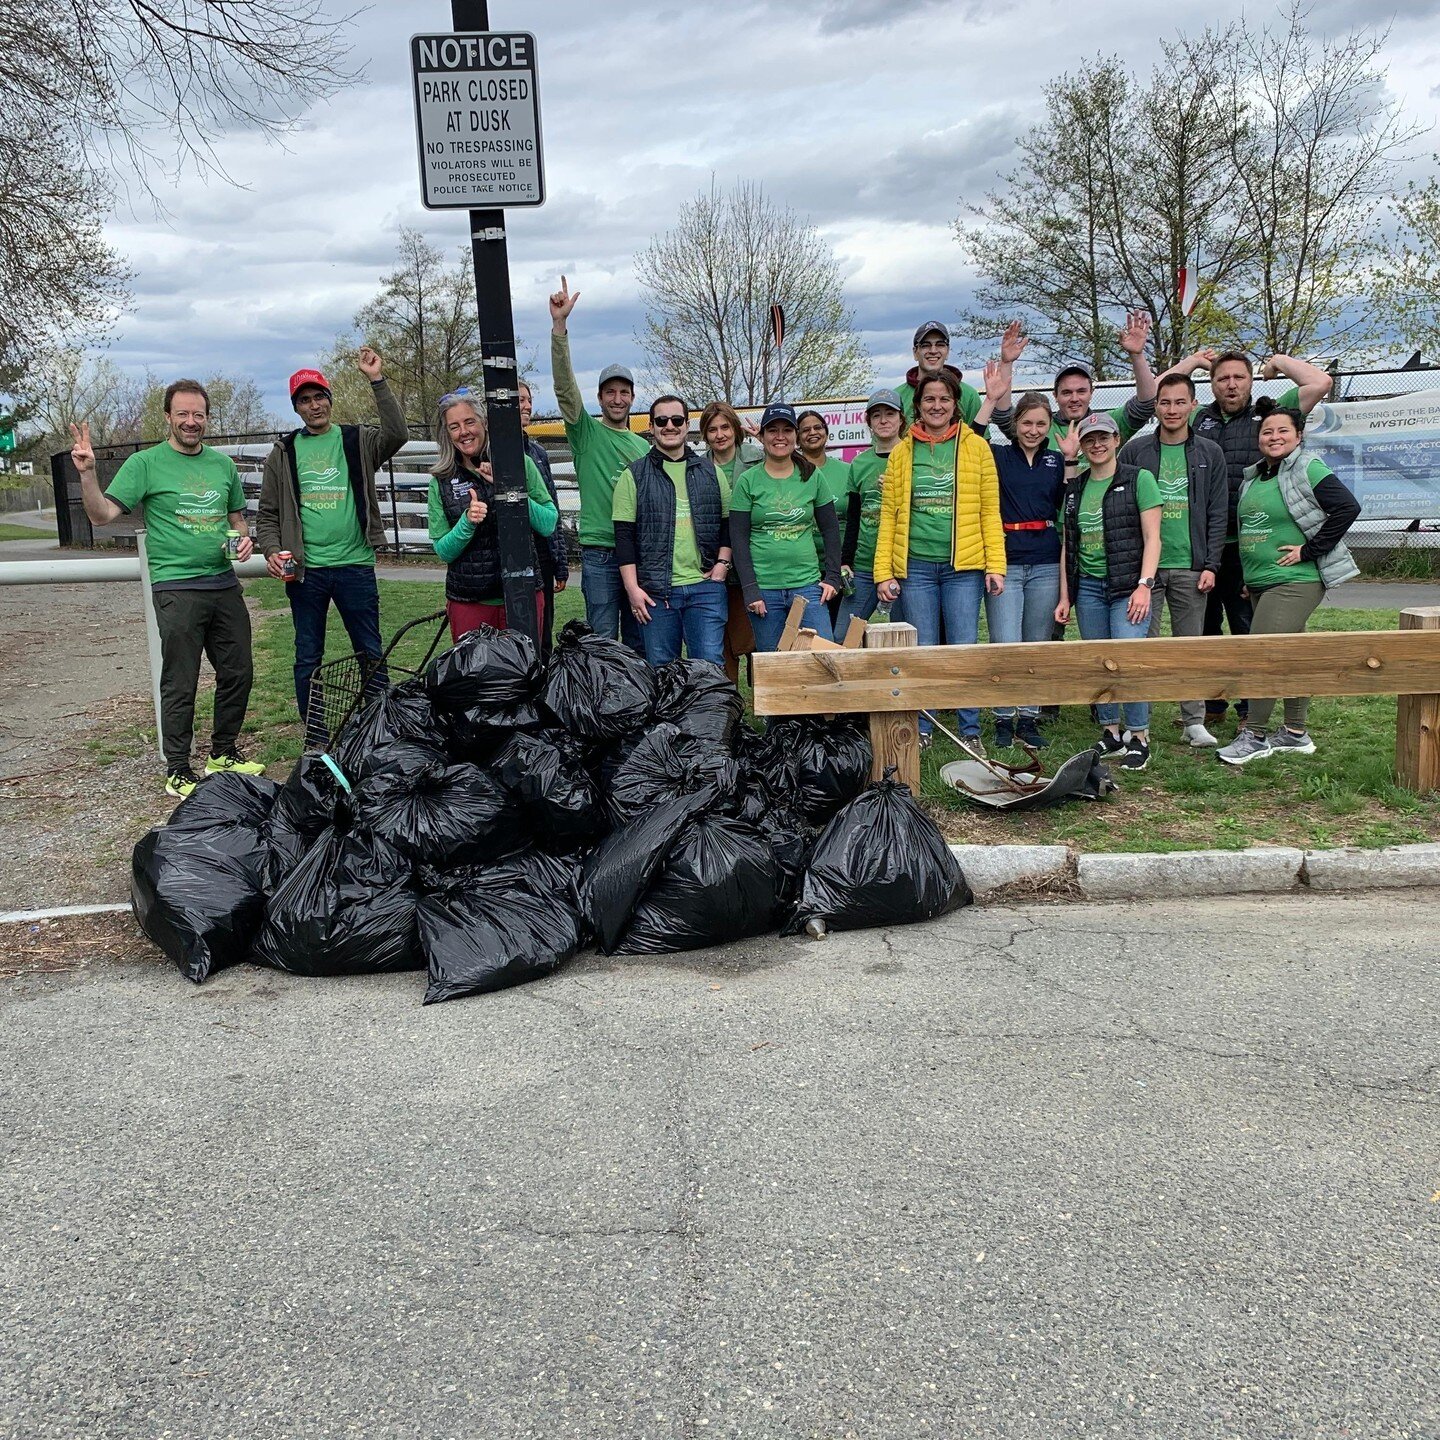 Our #CommonwealthWind team and @avangrid colleagues collected over 35 bags of trash yesterday in partnership with @mystic.river.watershed. #CleanUp #EarthWeek